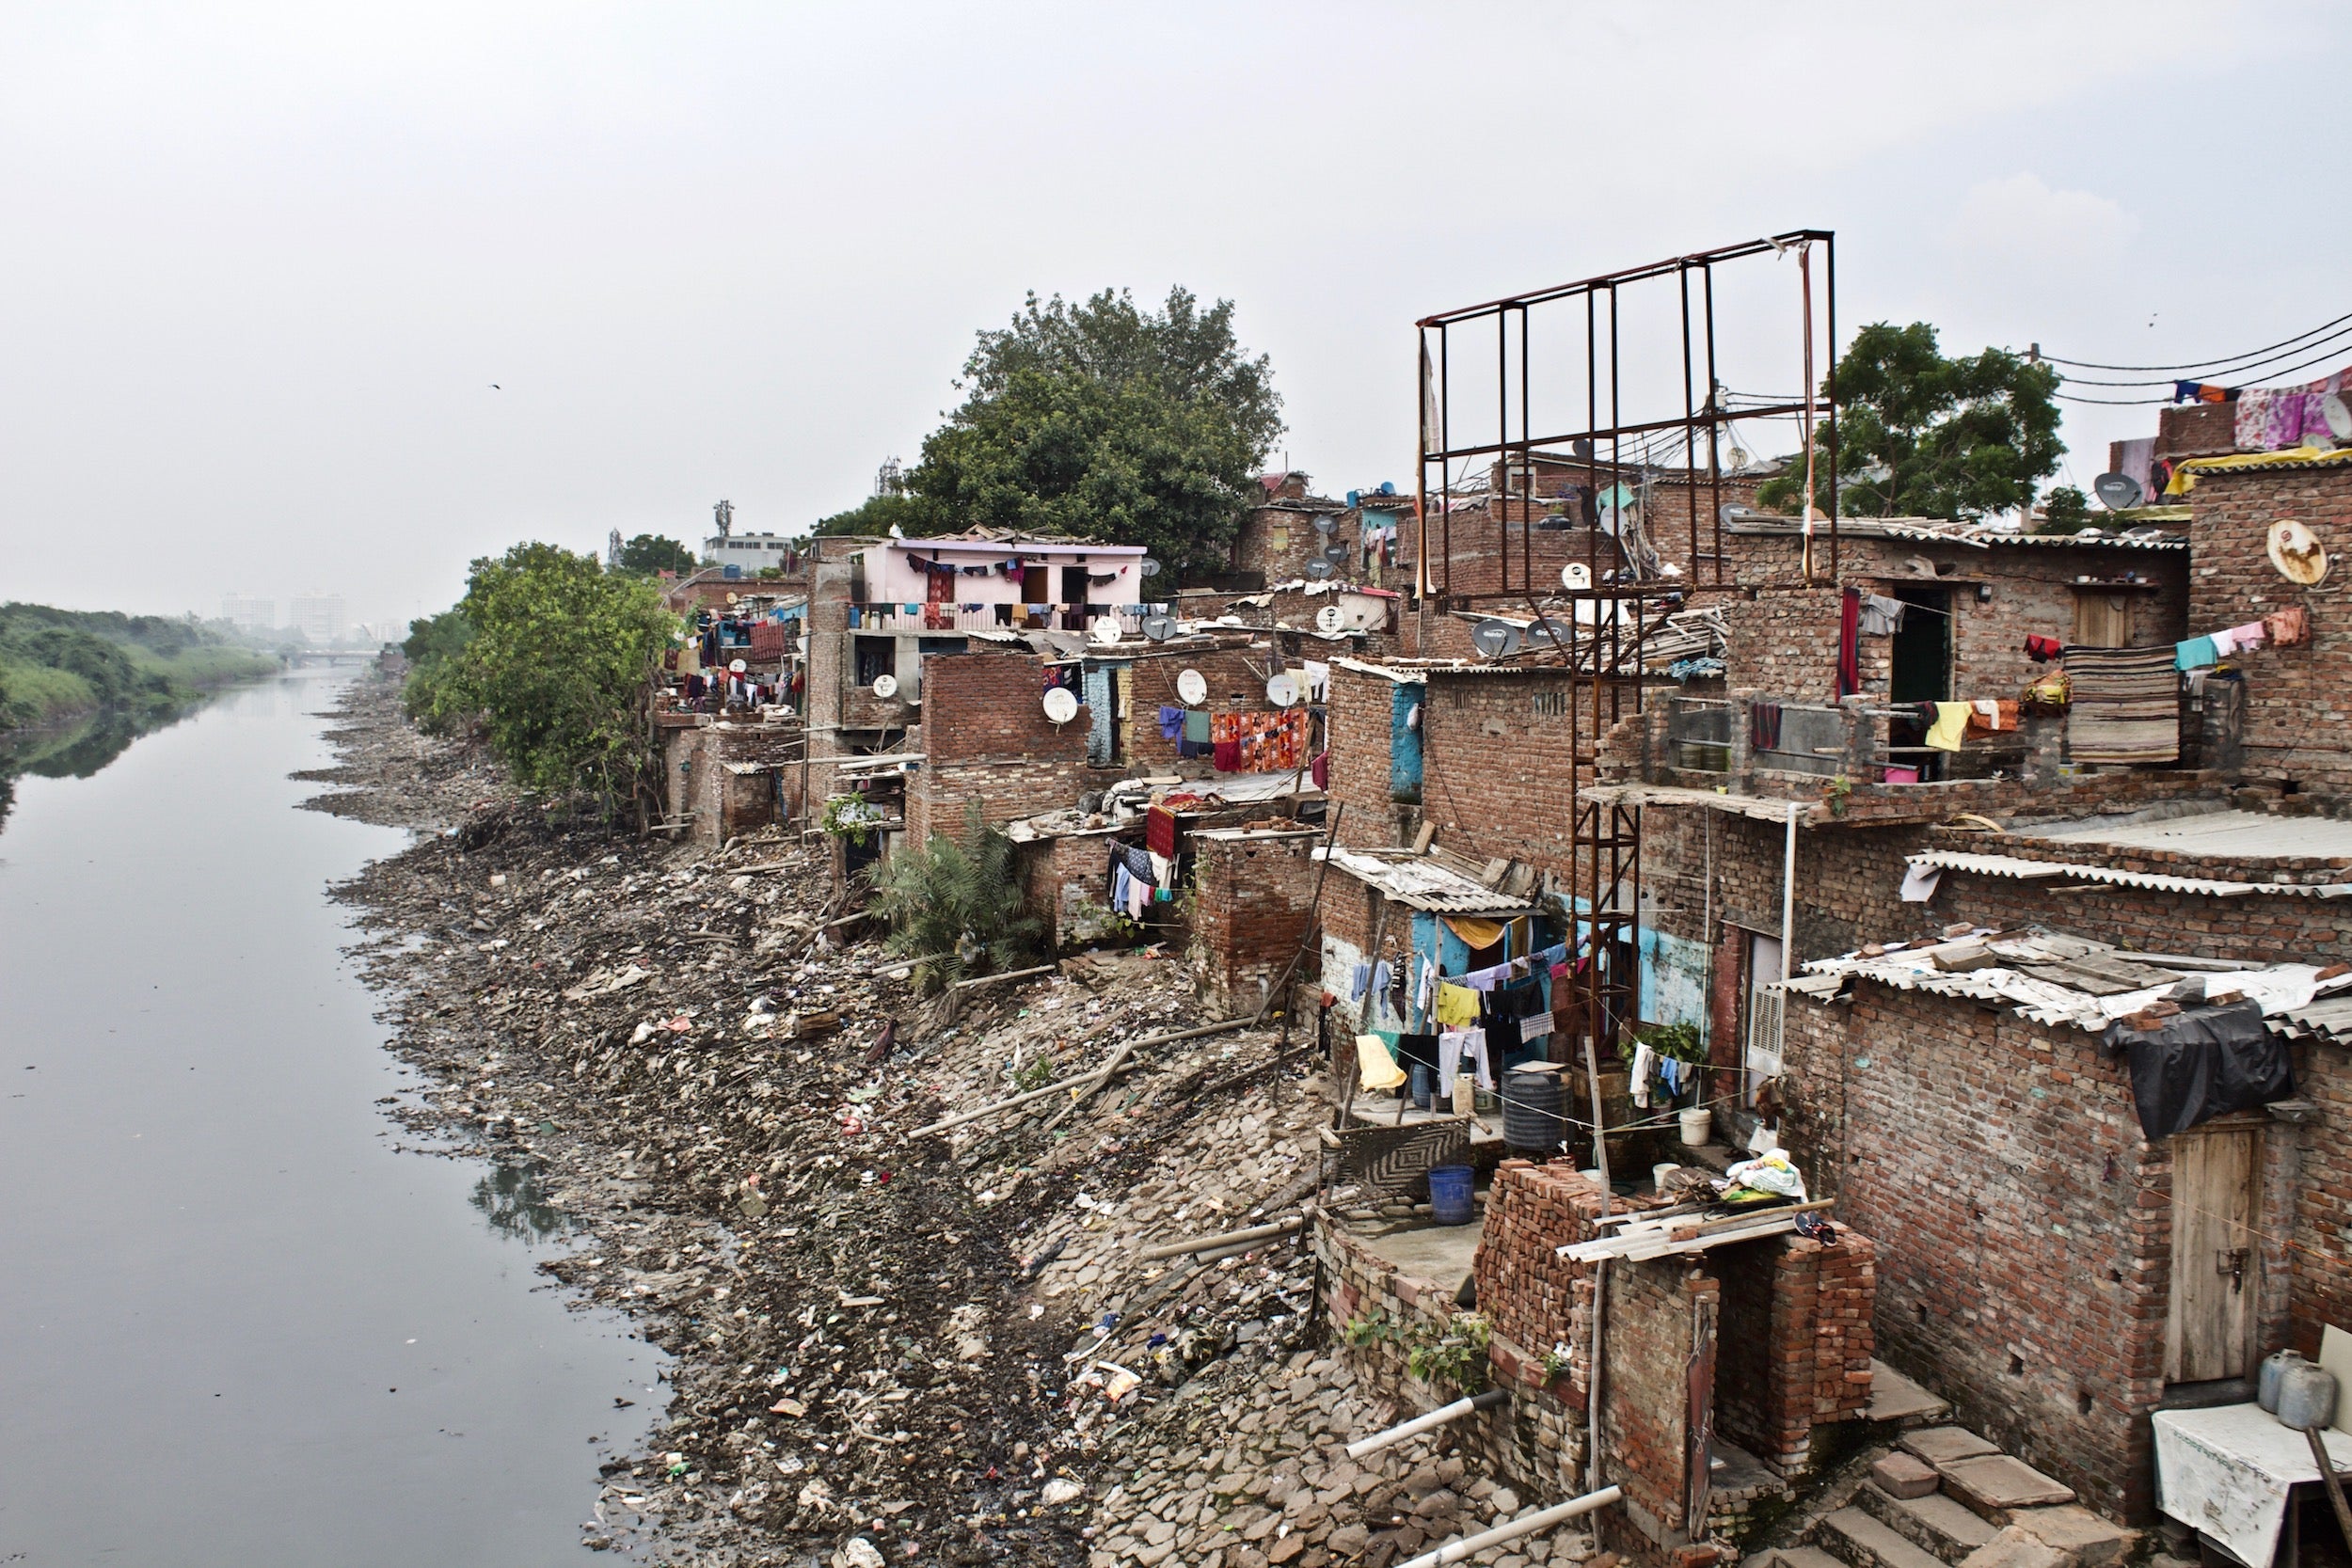 Modicare will cater to the poorest 40 per cent of Indians – eventually including those living in slums like this one, on the outskirts of Delhi. Here, there was little awareness of the incoming scheme